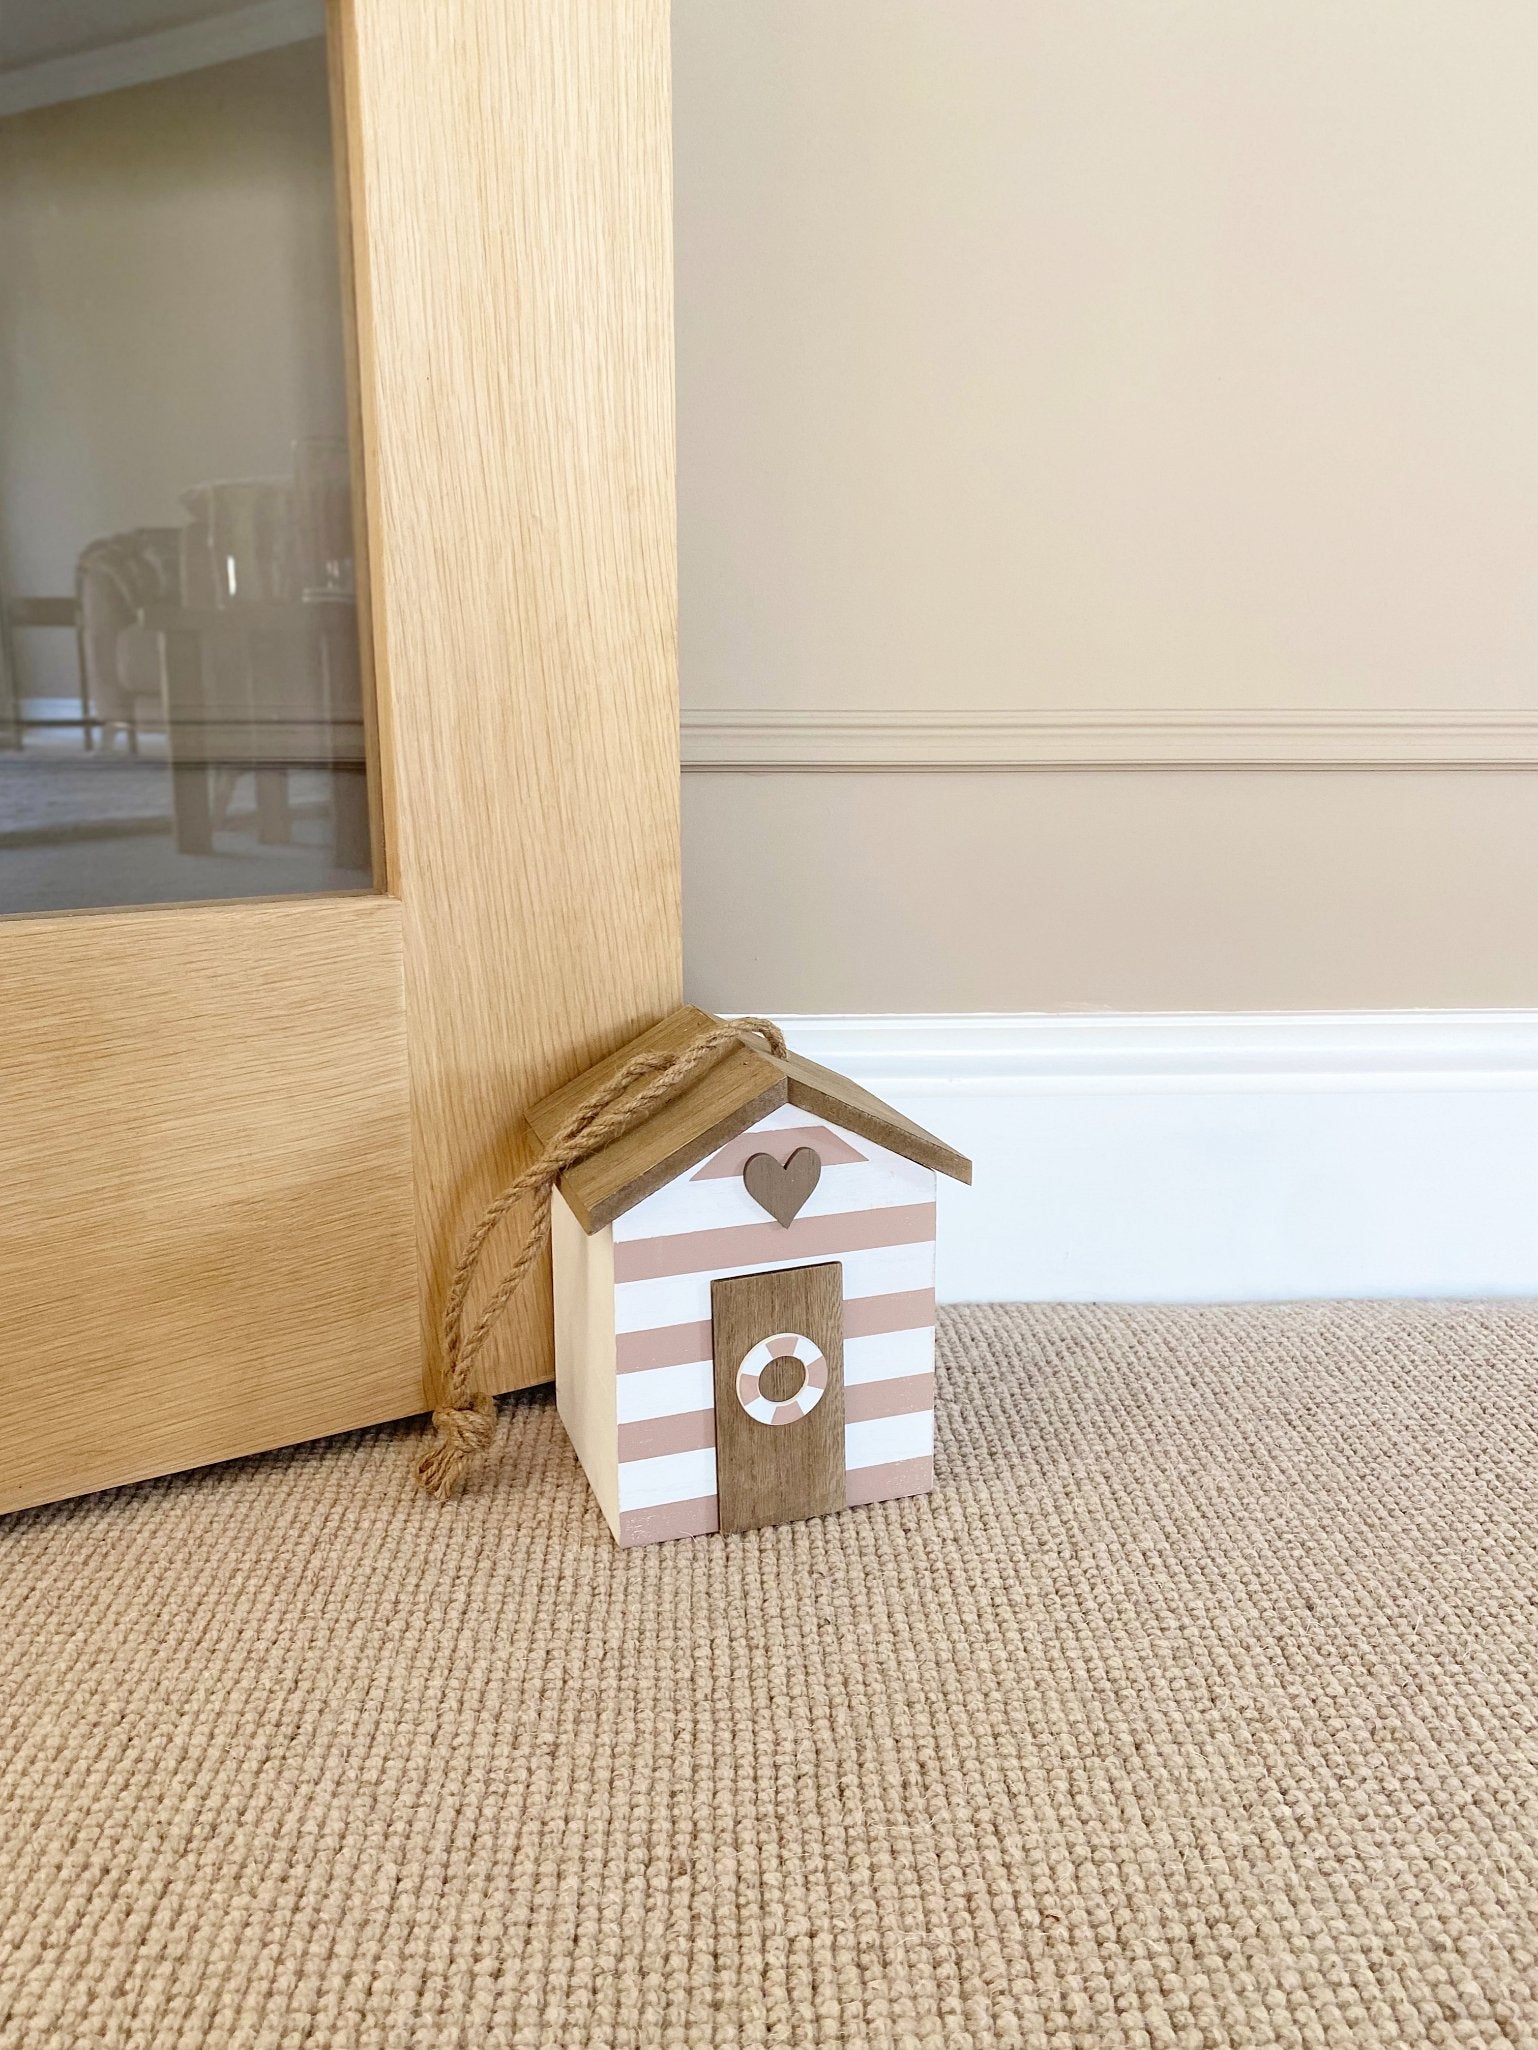 View Striped Beach House Doorstop information